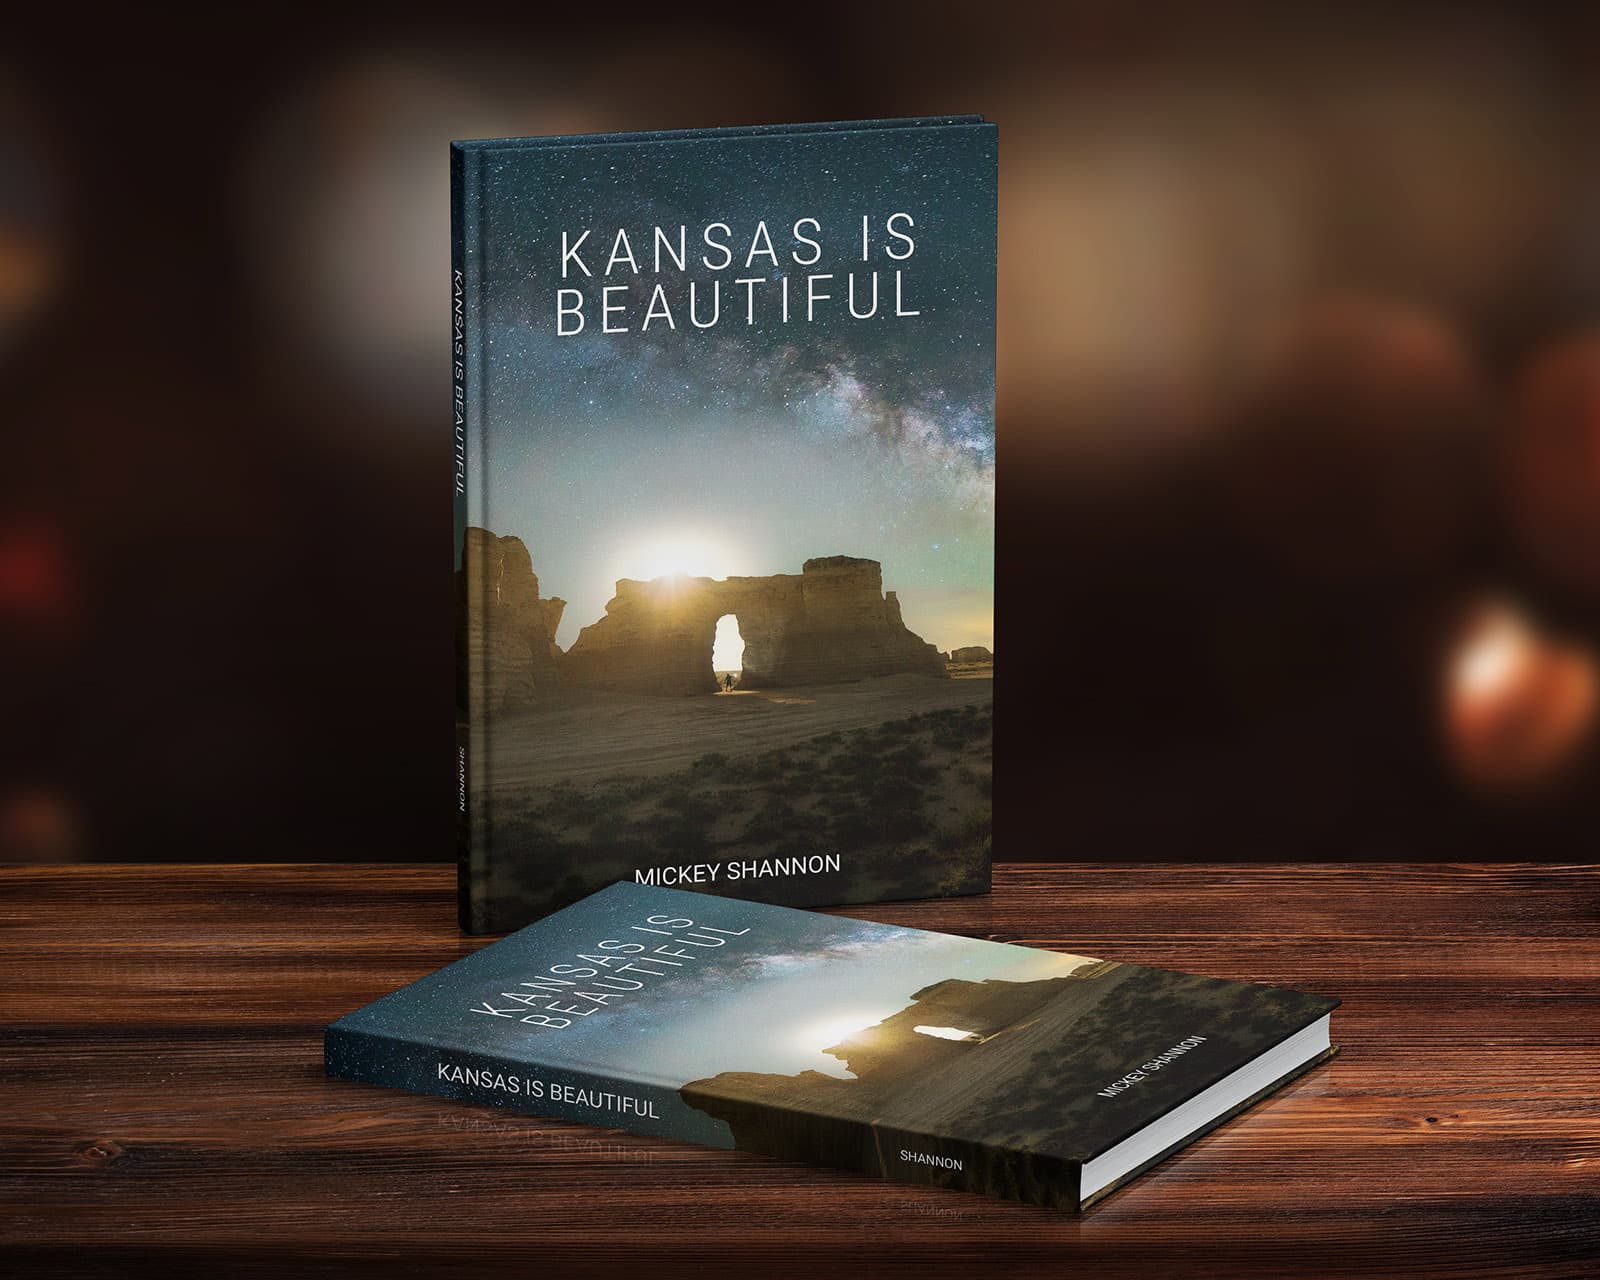 https://www.mickeyshannon.com/images/products/kansas-book/kansas-is-beautiful-book.jpg